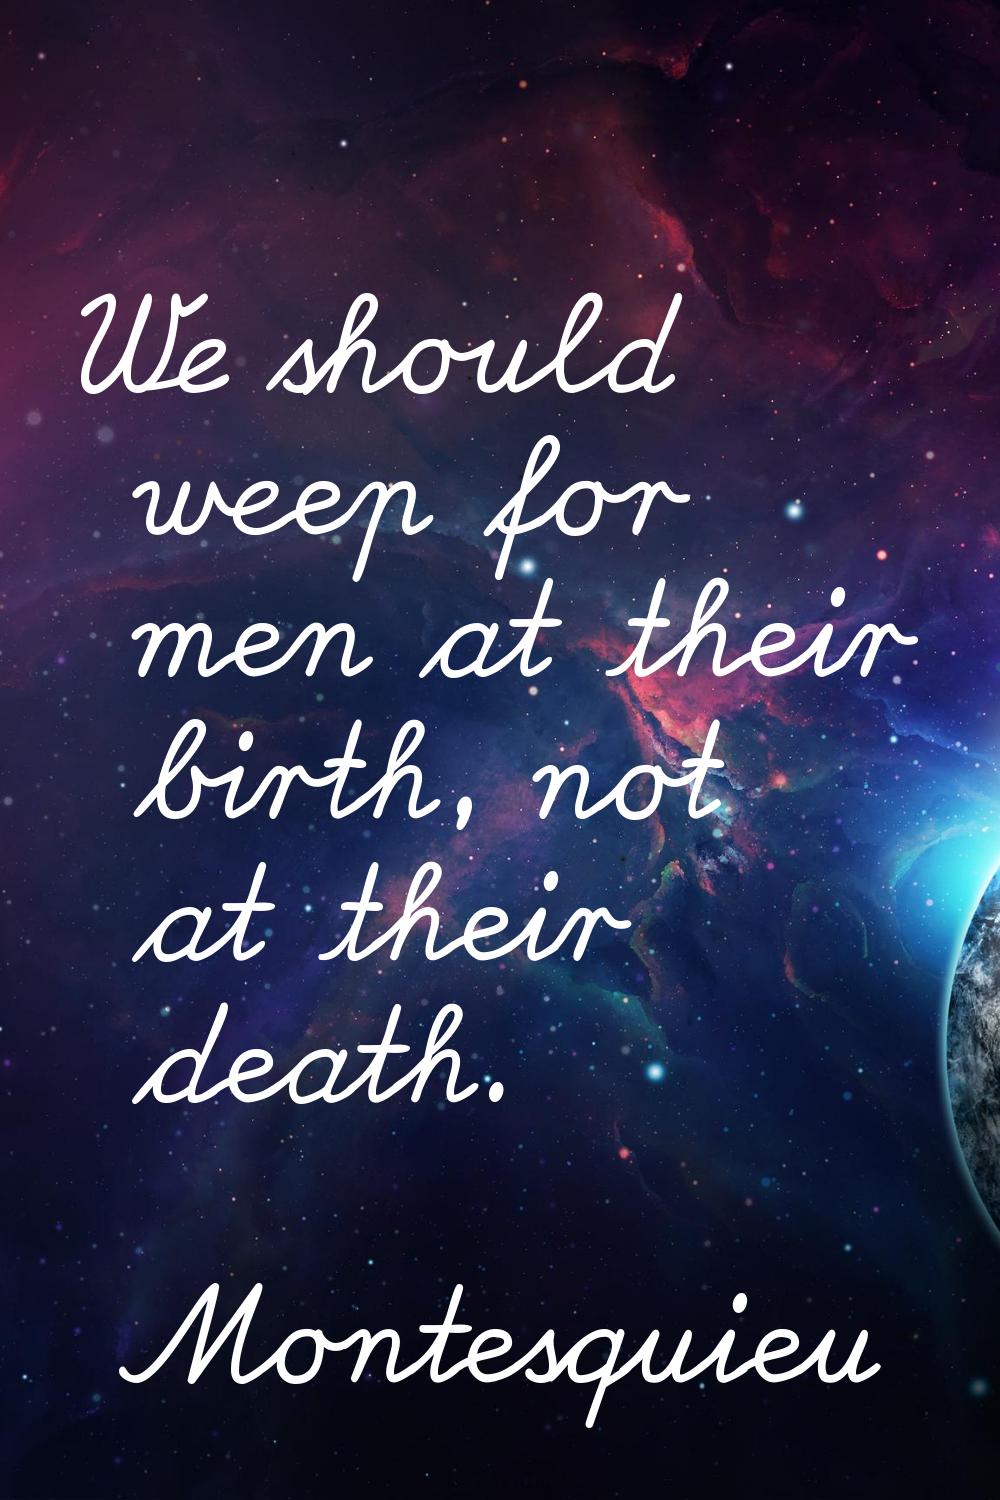 We should weep for men at their birth, not at their death.